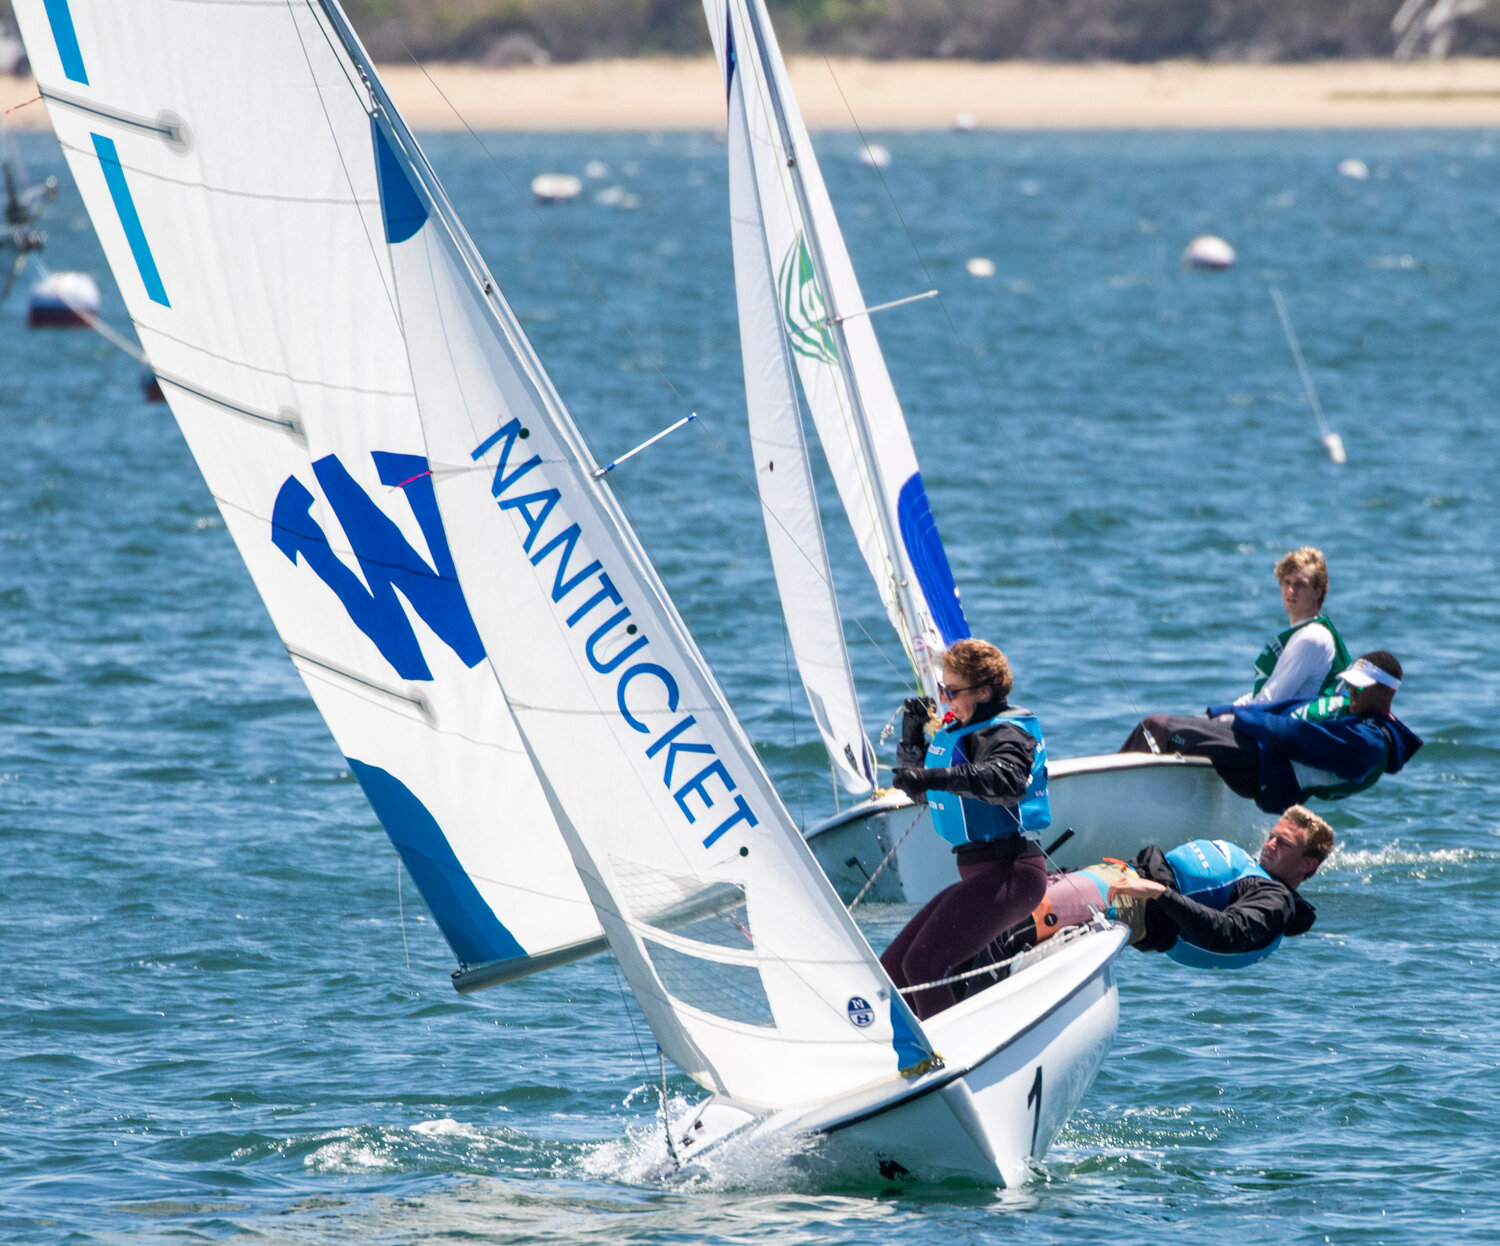 Nantucket High School sailors on the water of Nantucket Harbor in the 2019 Figawi High School Invitational, now called the Crawford Cup.